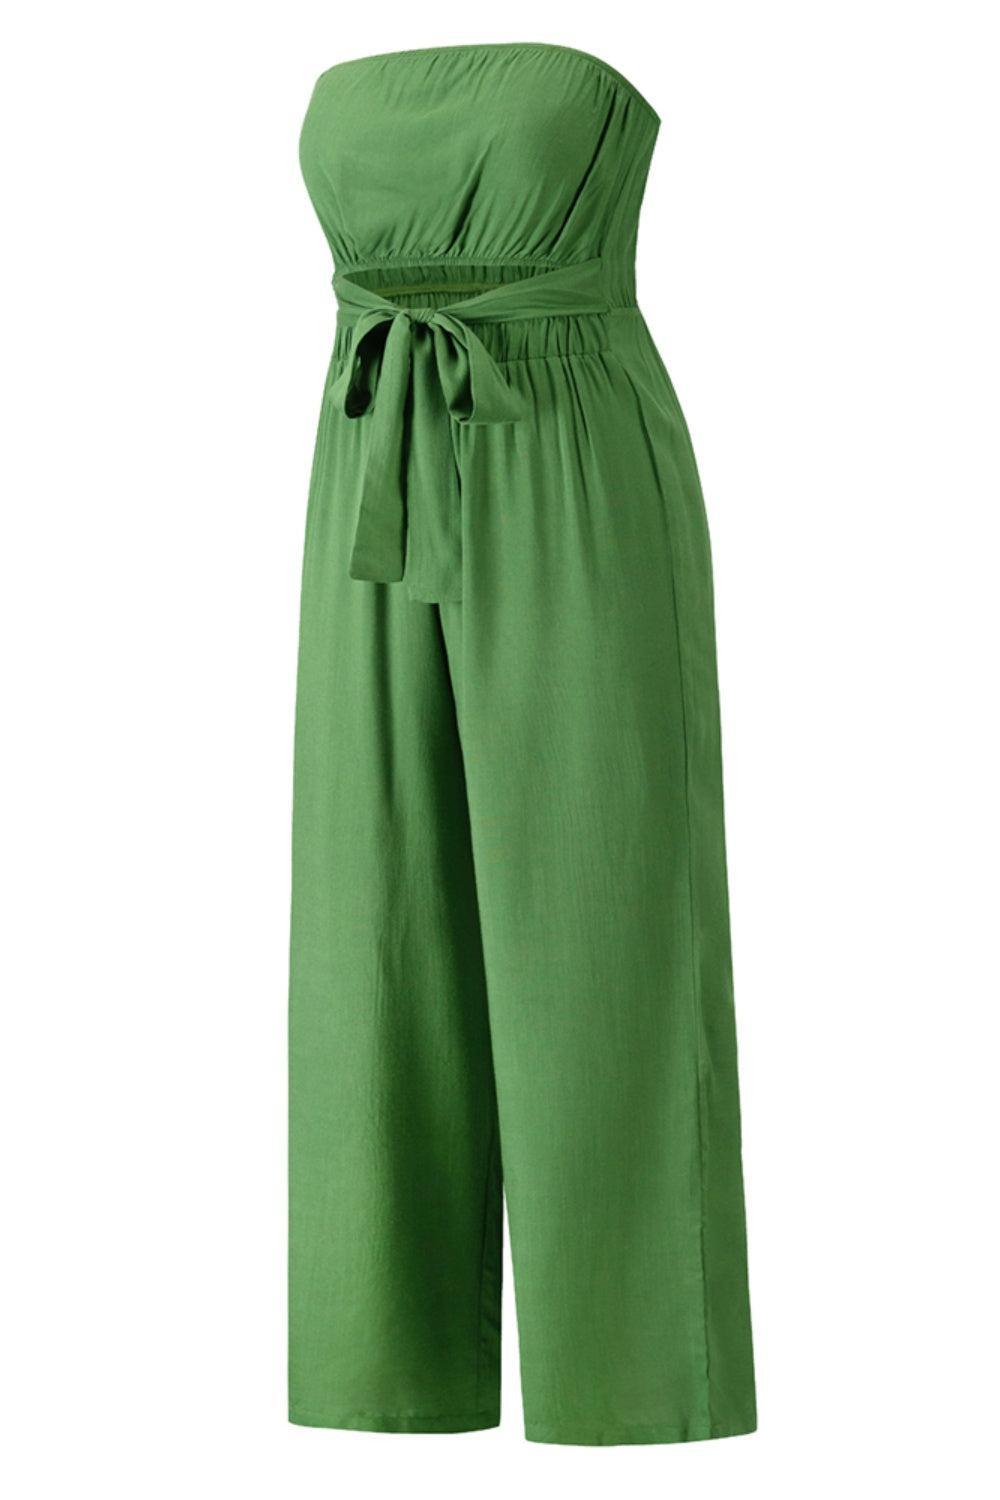 a woman wearing a green jumpsuit with a tie around the waist